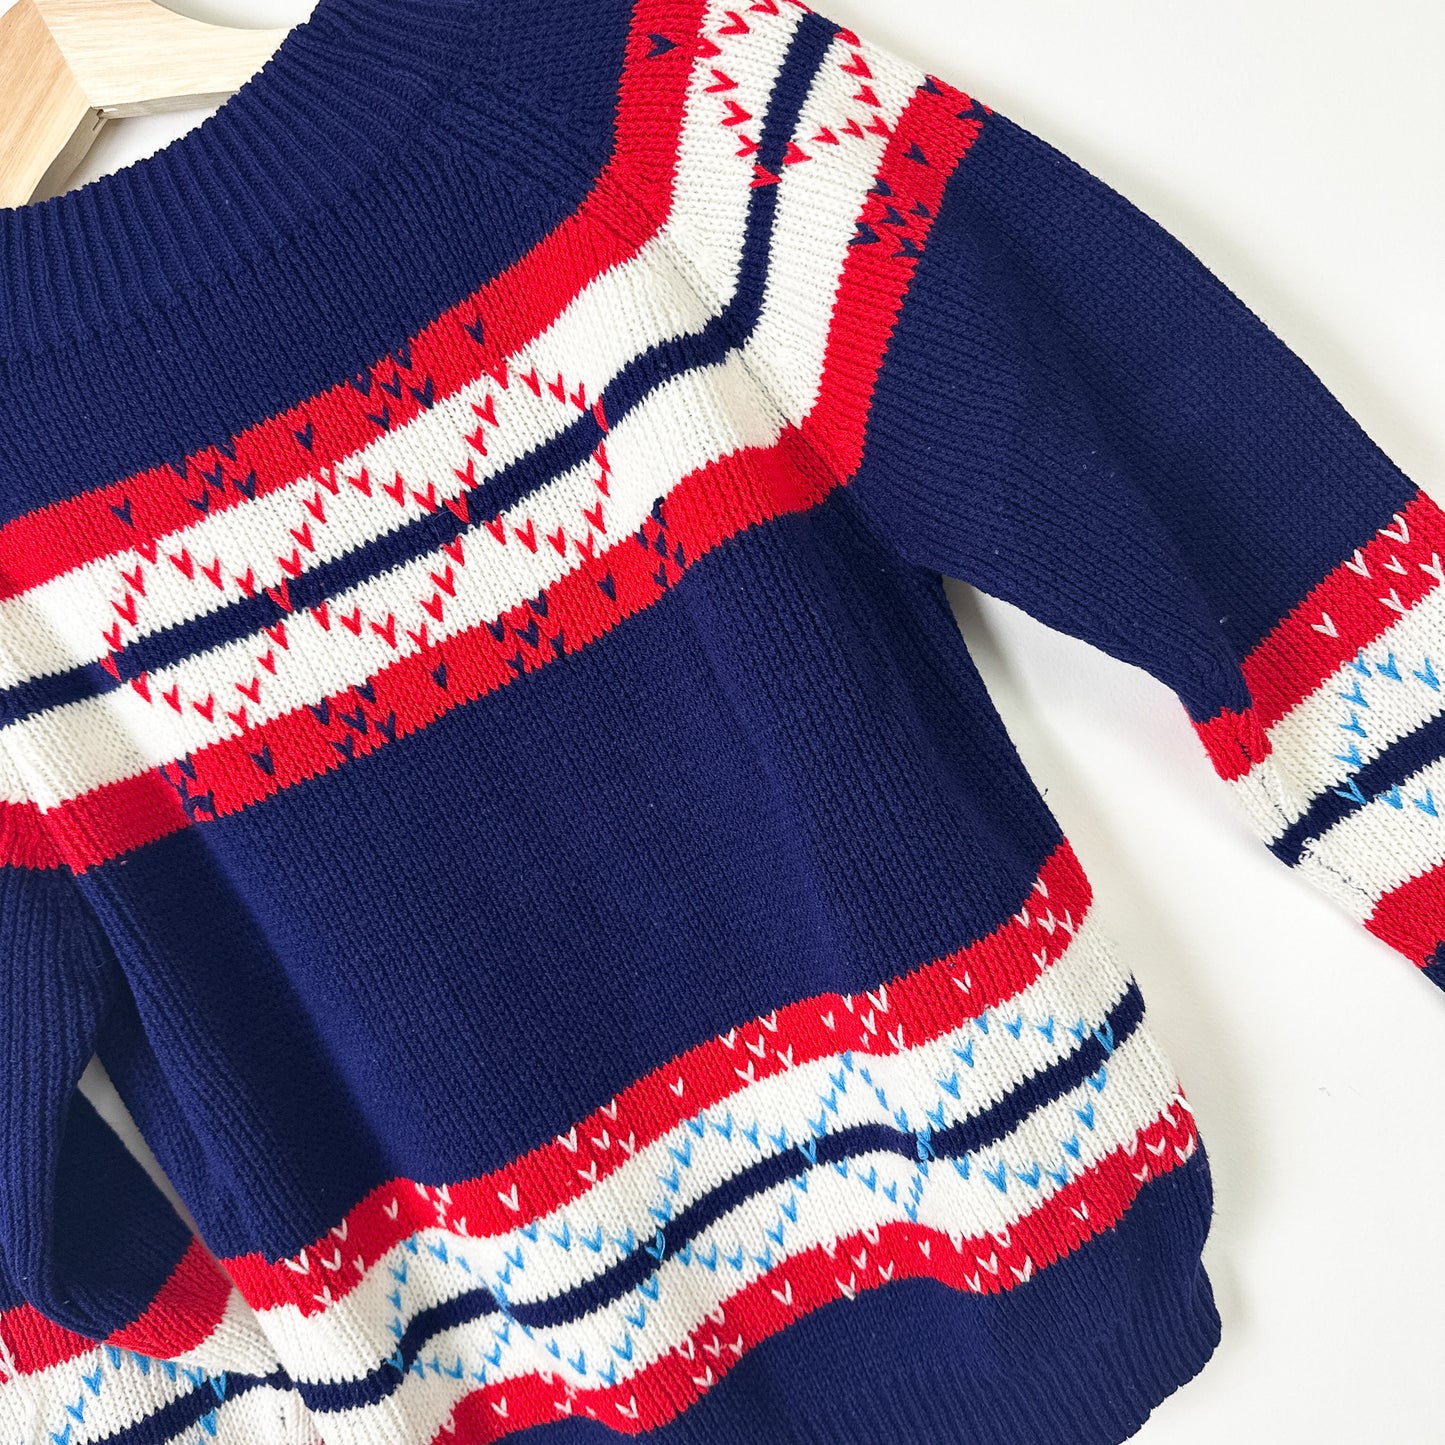 Vintage Kid's JCPenney Acrylic Sweater - Size 12-14yr